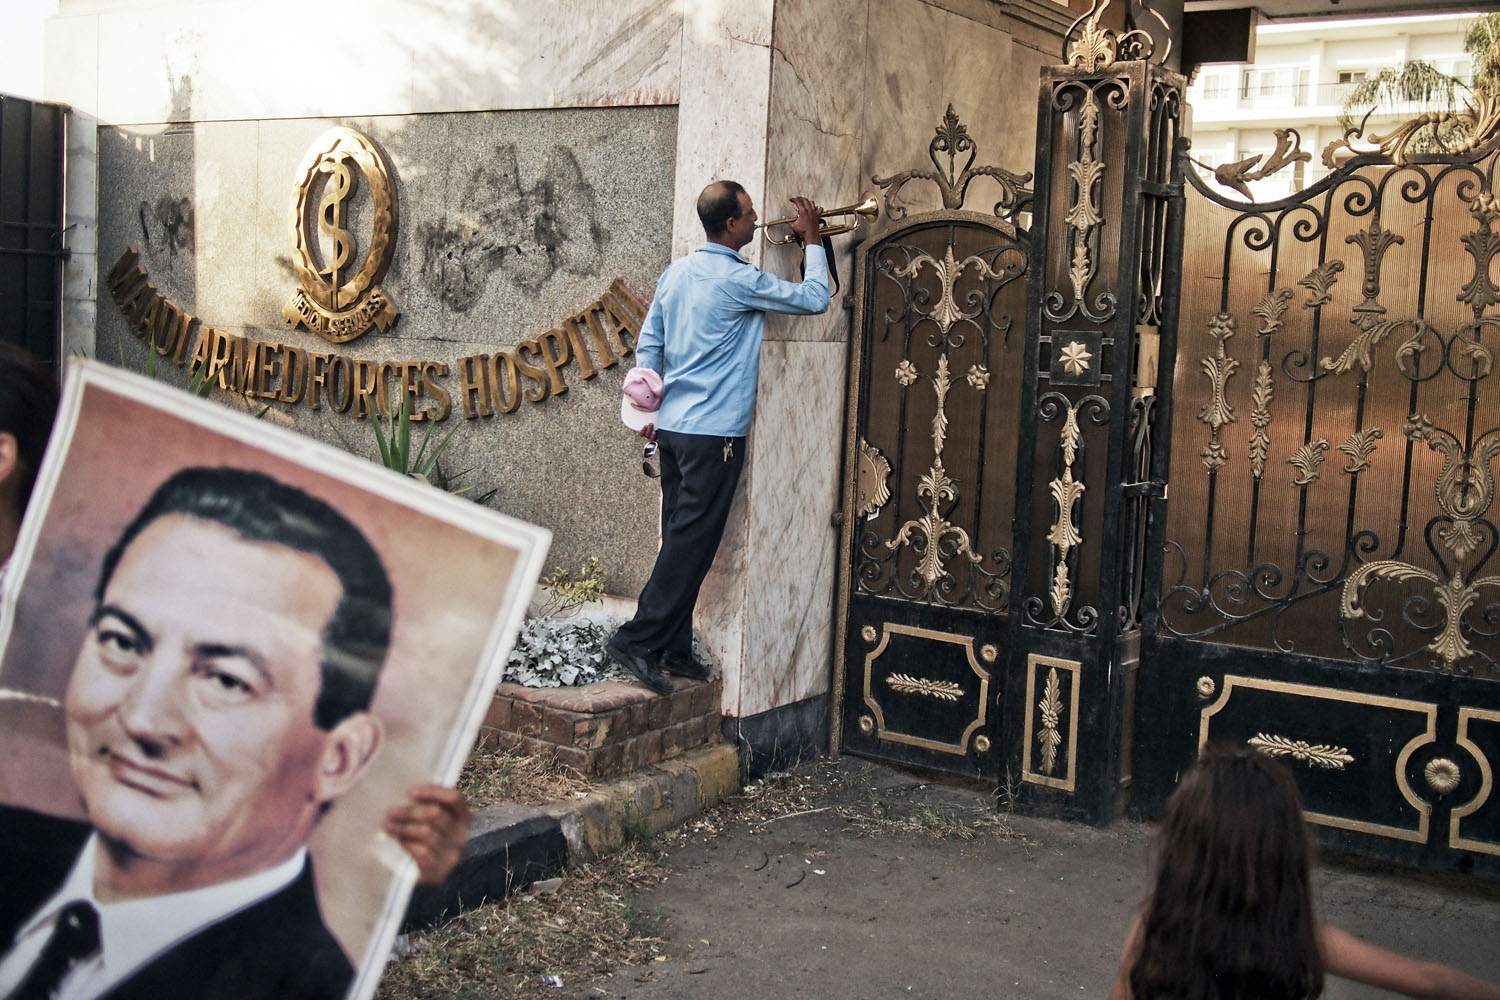 EGYPT. Cairo. August 22, 2013. A supporter of former Egyptian President Hosni Mubarak plays the trumpet at the gates of the Maadi Military Hospital where Mr. Mubarak was admited after being released from Tora Prison on the outskirts of Cairo, Thursday.